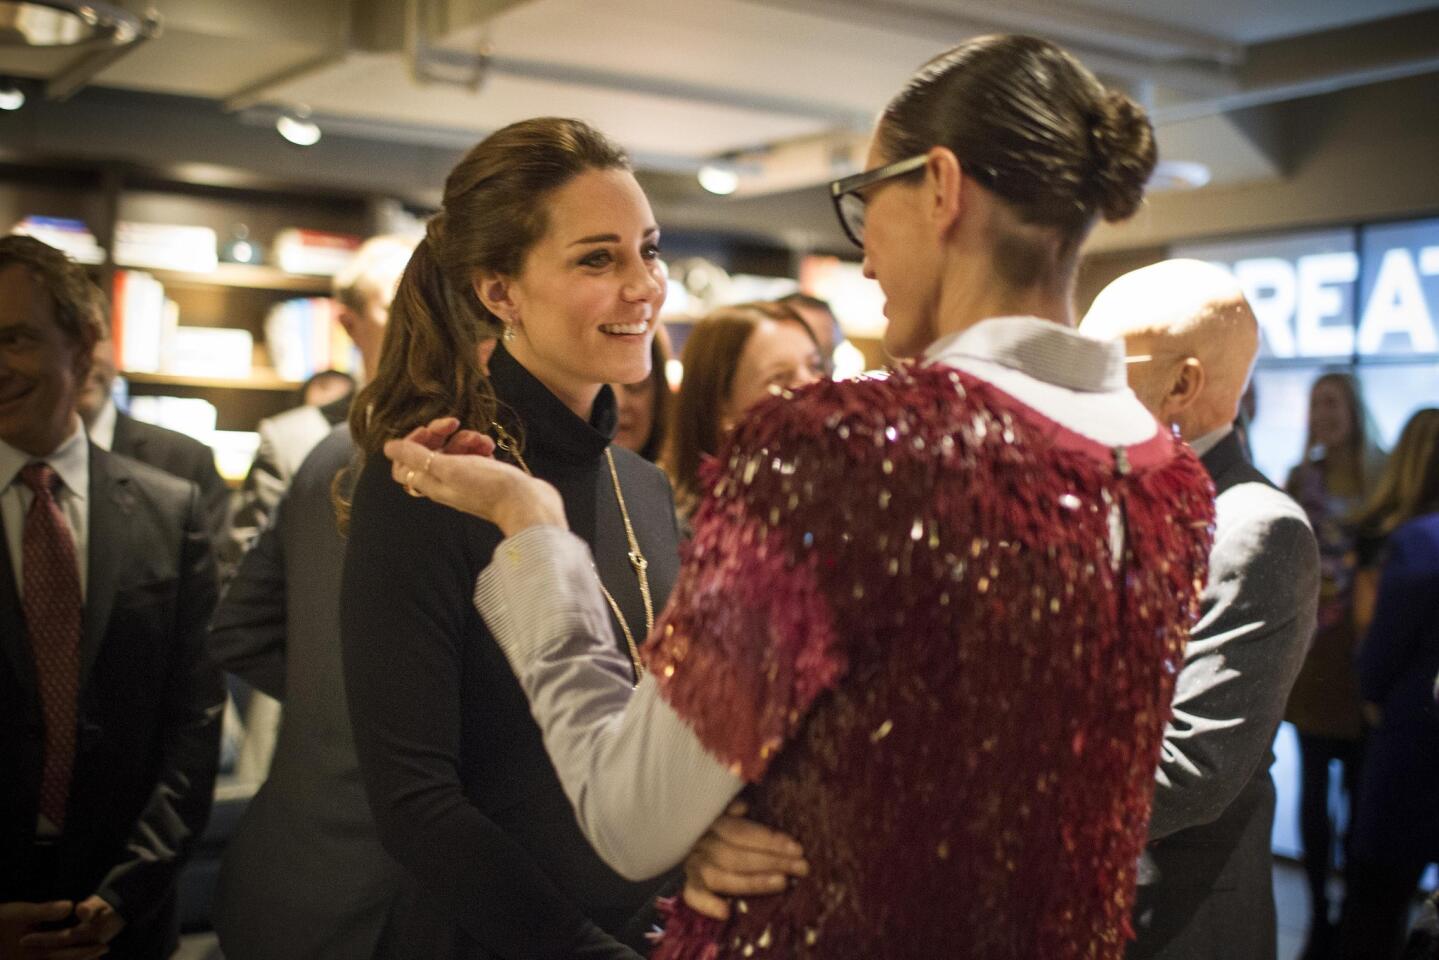 Kate, Duchess of Cambridge, speaks to fashion designer Jenna Lyons at the Creativity is GREAT at NeueHouse on Tuesday in New York.